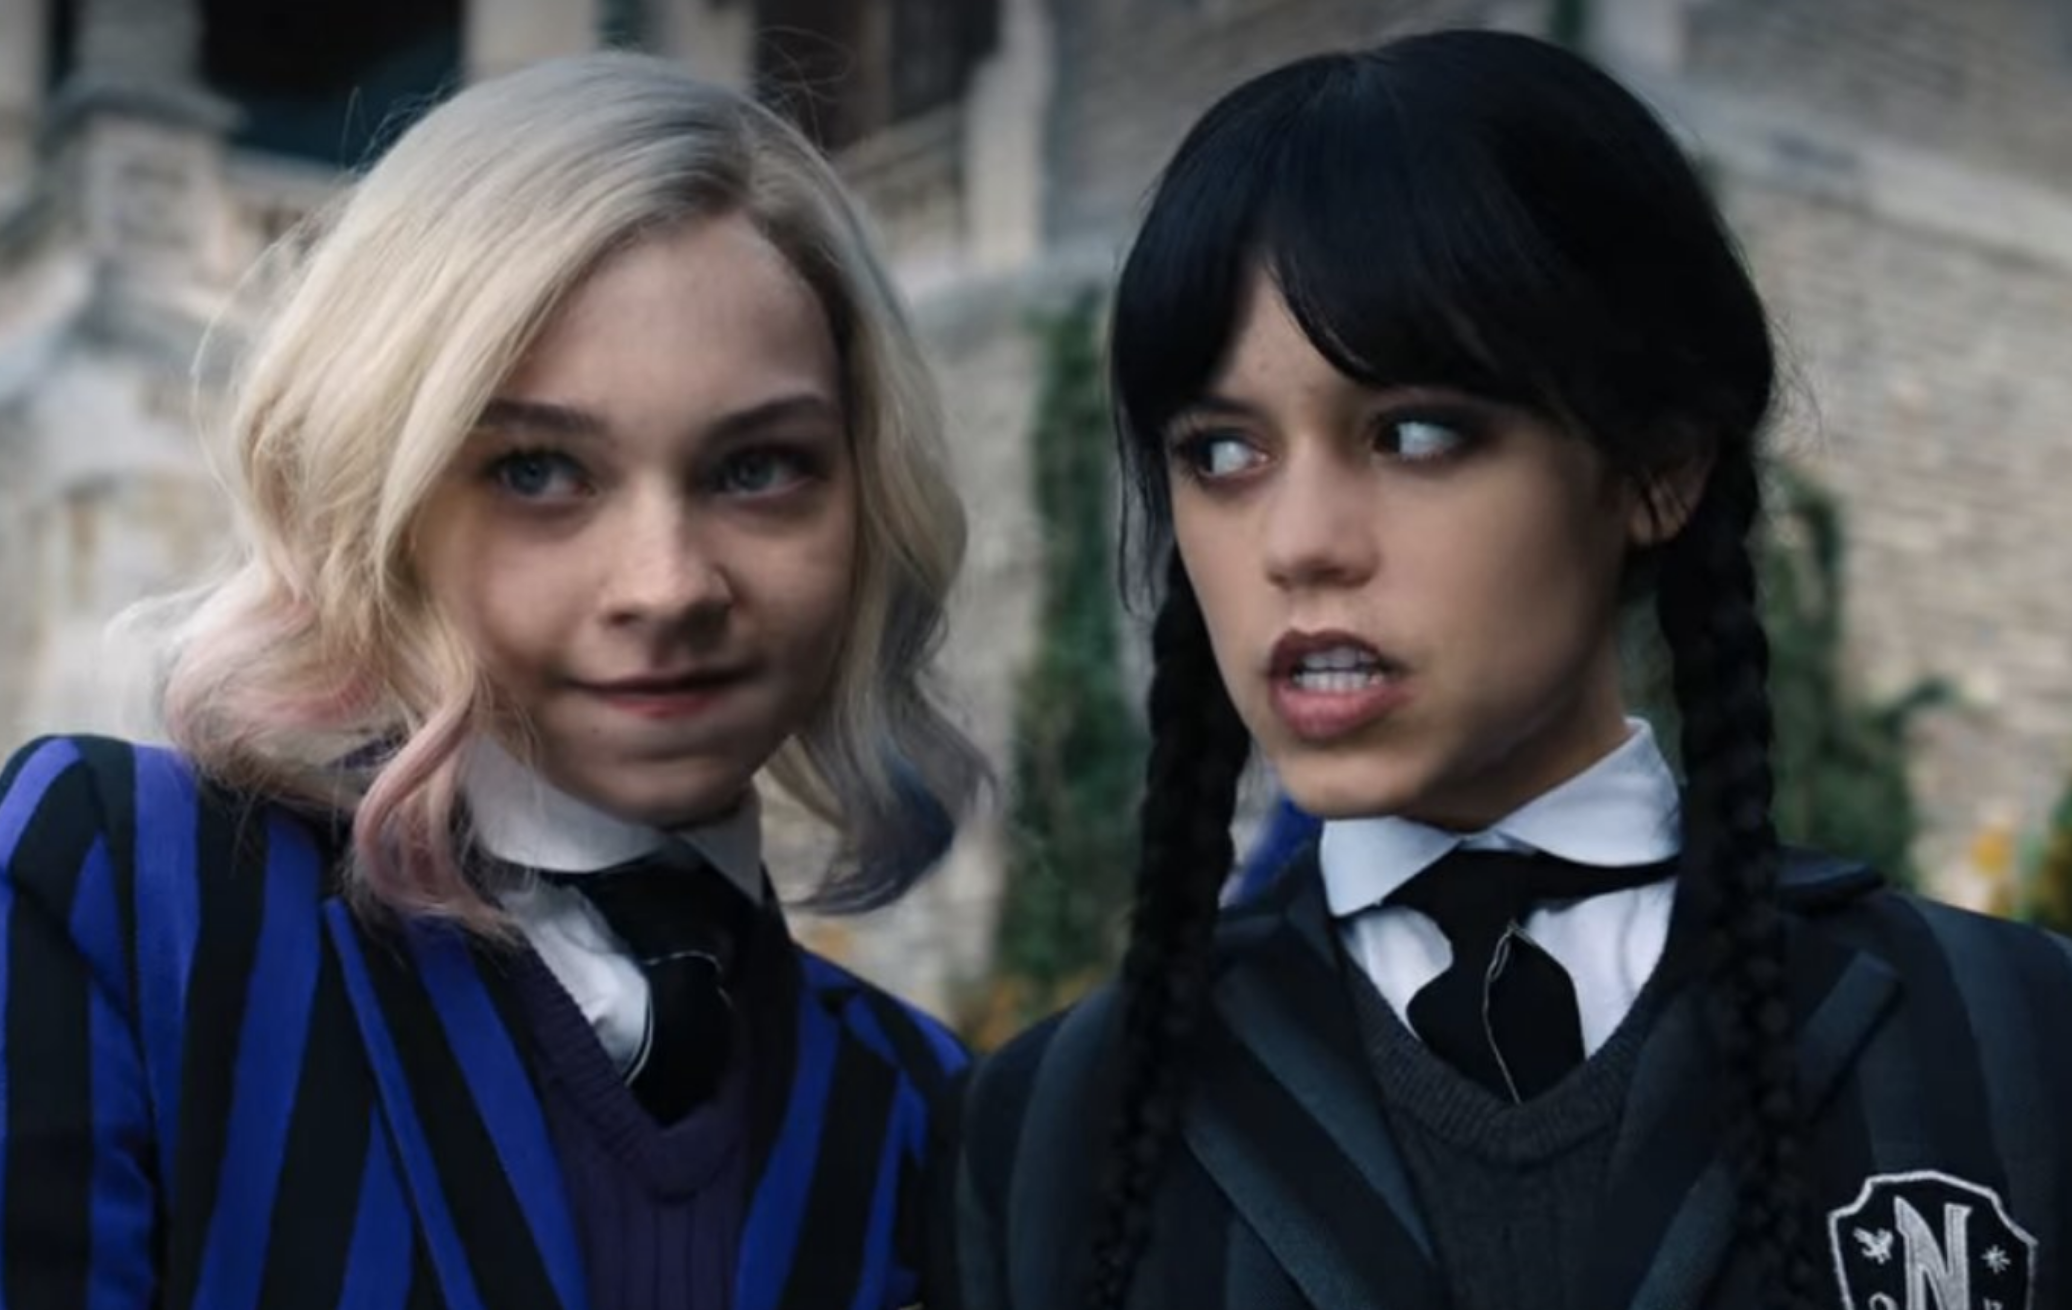 Enid and Wednesday on campus at Nevermore Academy.